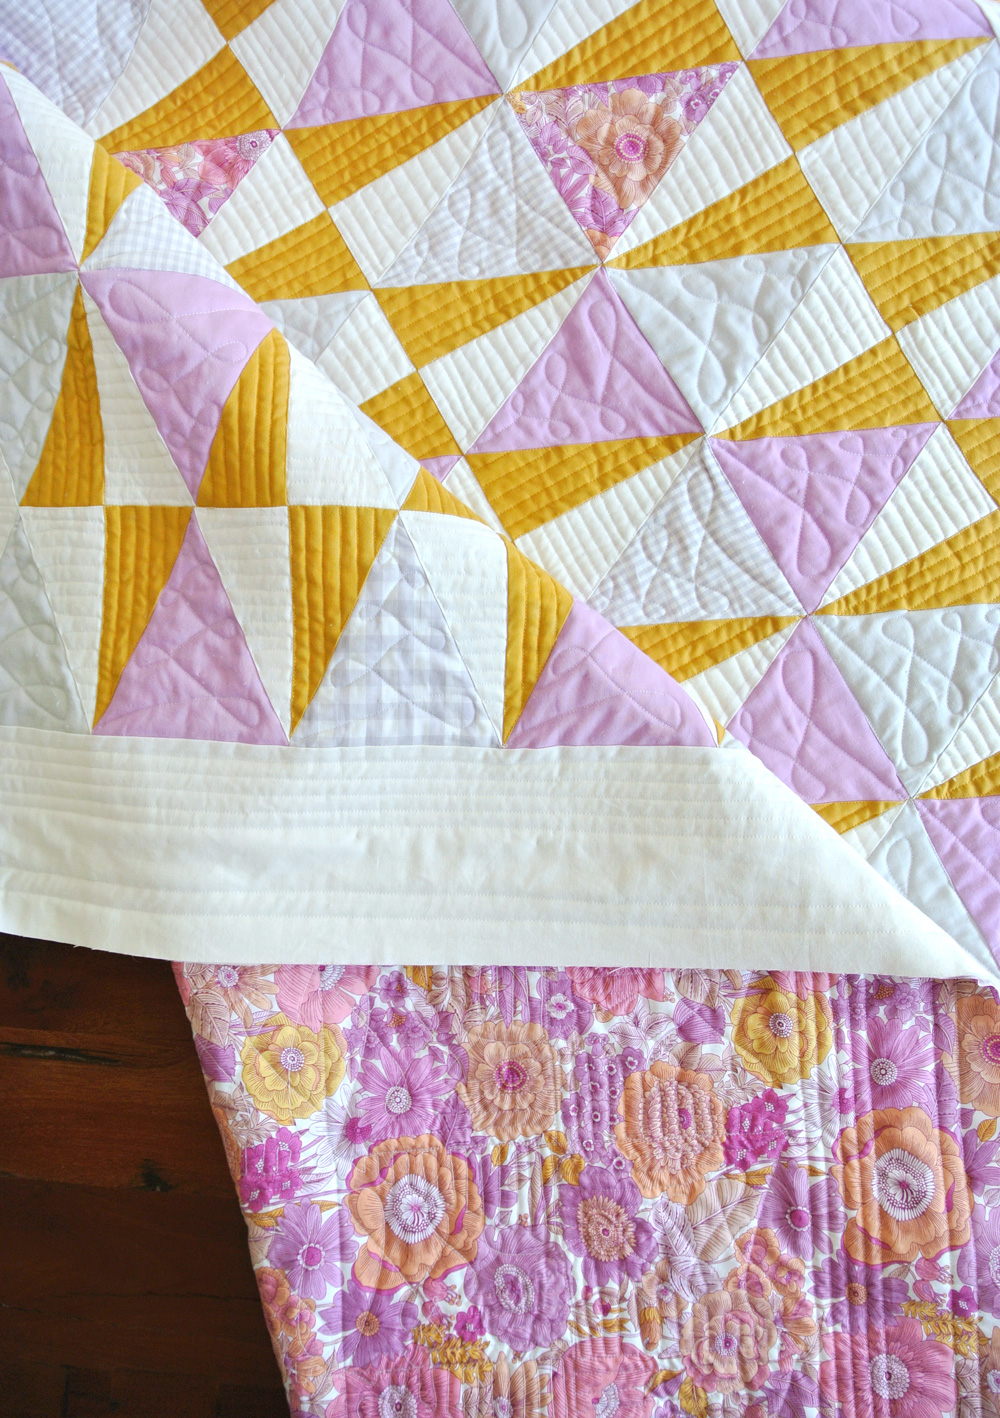 This FREE quilt pattern download, Liberty & Flowers, uses templates, making it the perfect sewing project for fussy cutting and scrap fabric. suzyquilts.com #quiltpattern